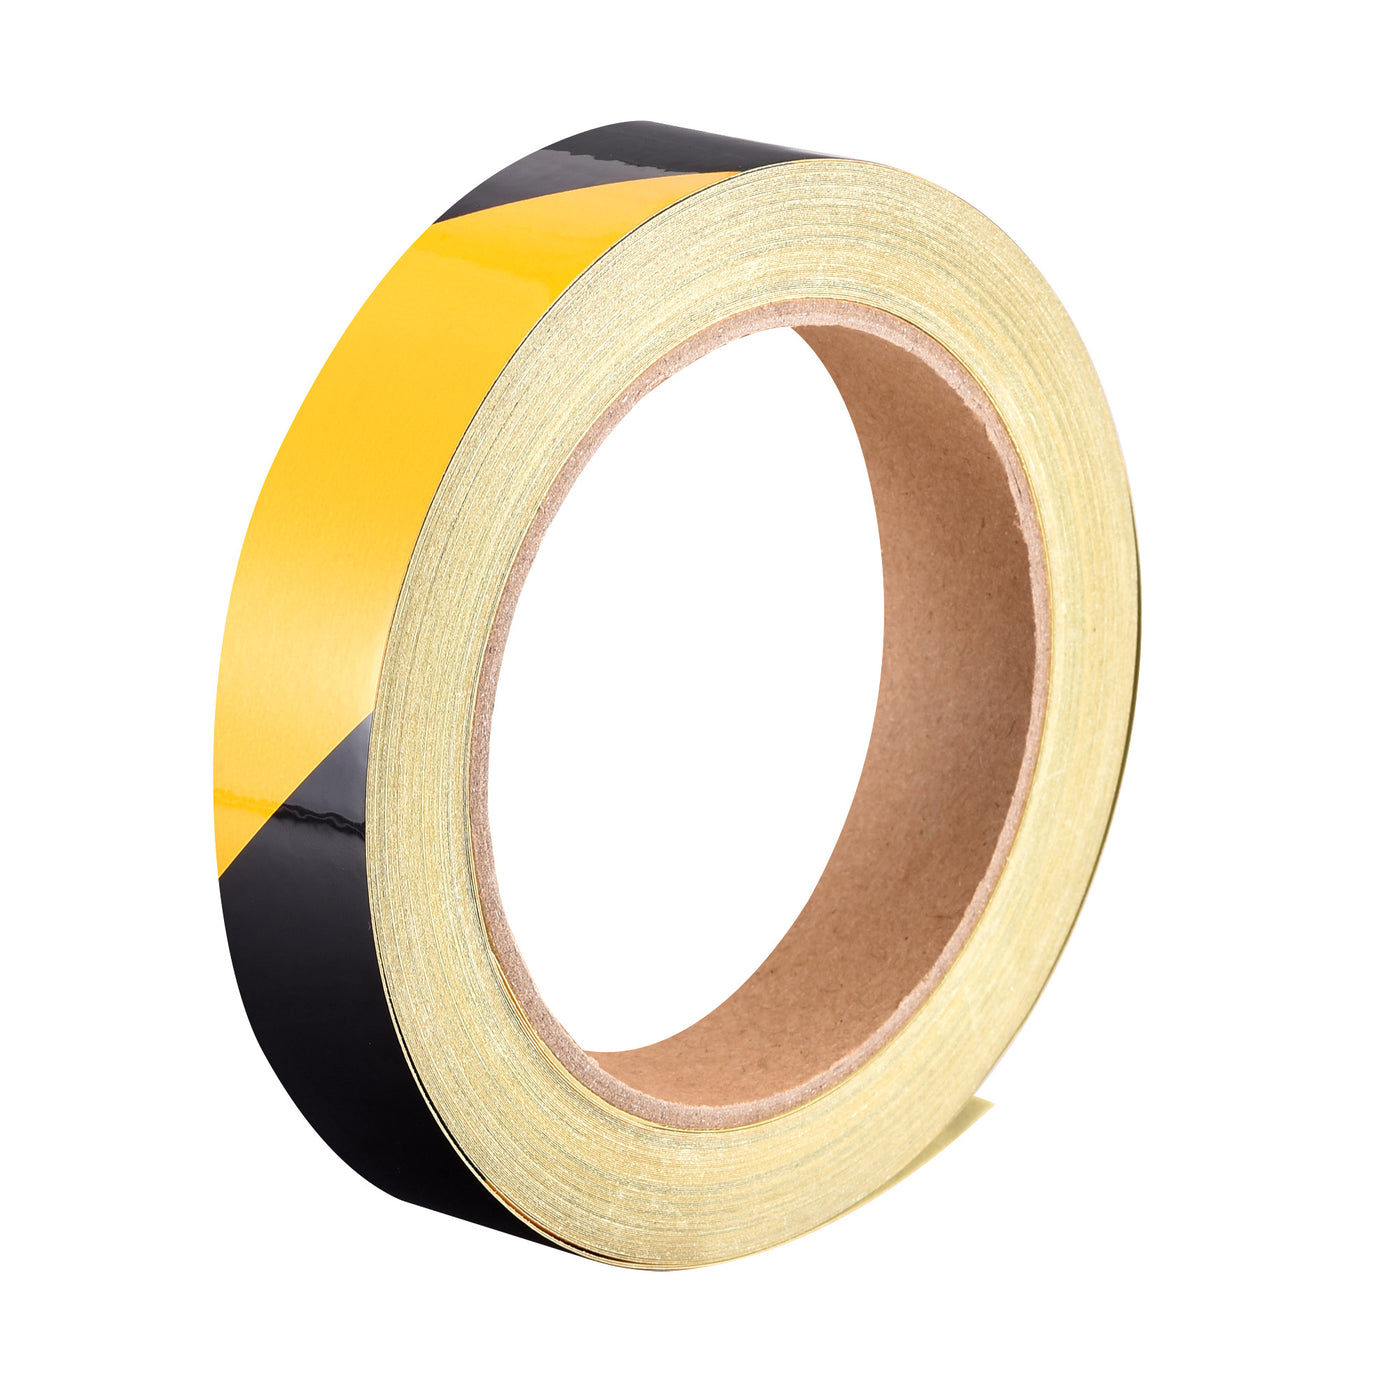 uxcell Uxcell Reflective Tape Yellow Black, 20mm x 25m, Outdoor Waterproof Warning Tape For Bikes, RV, and Boat Striping Marking